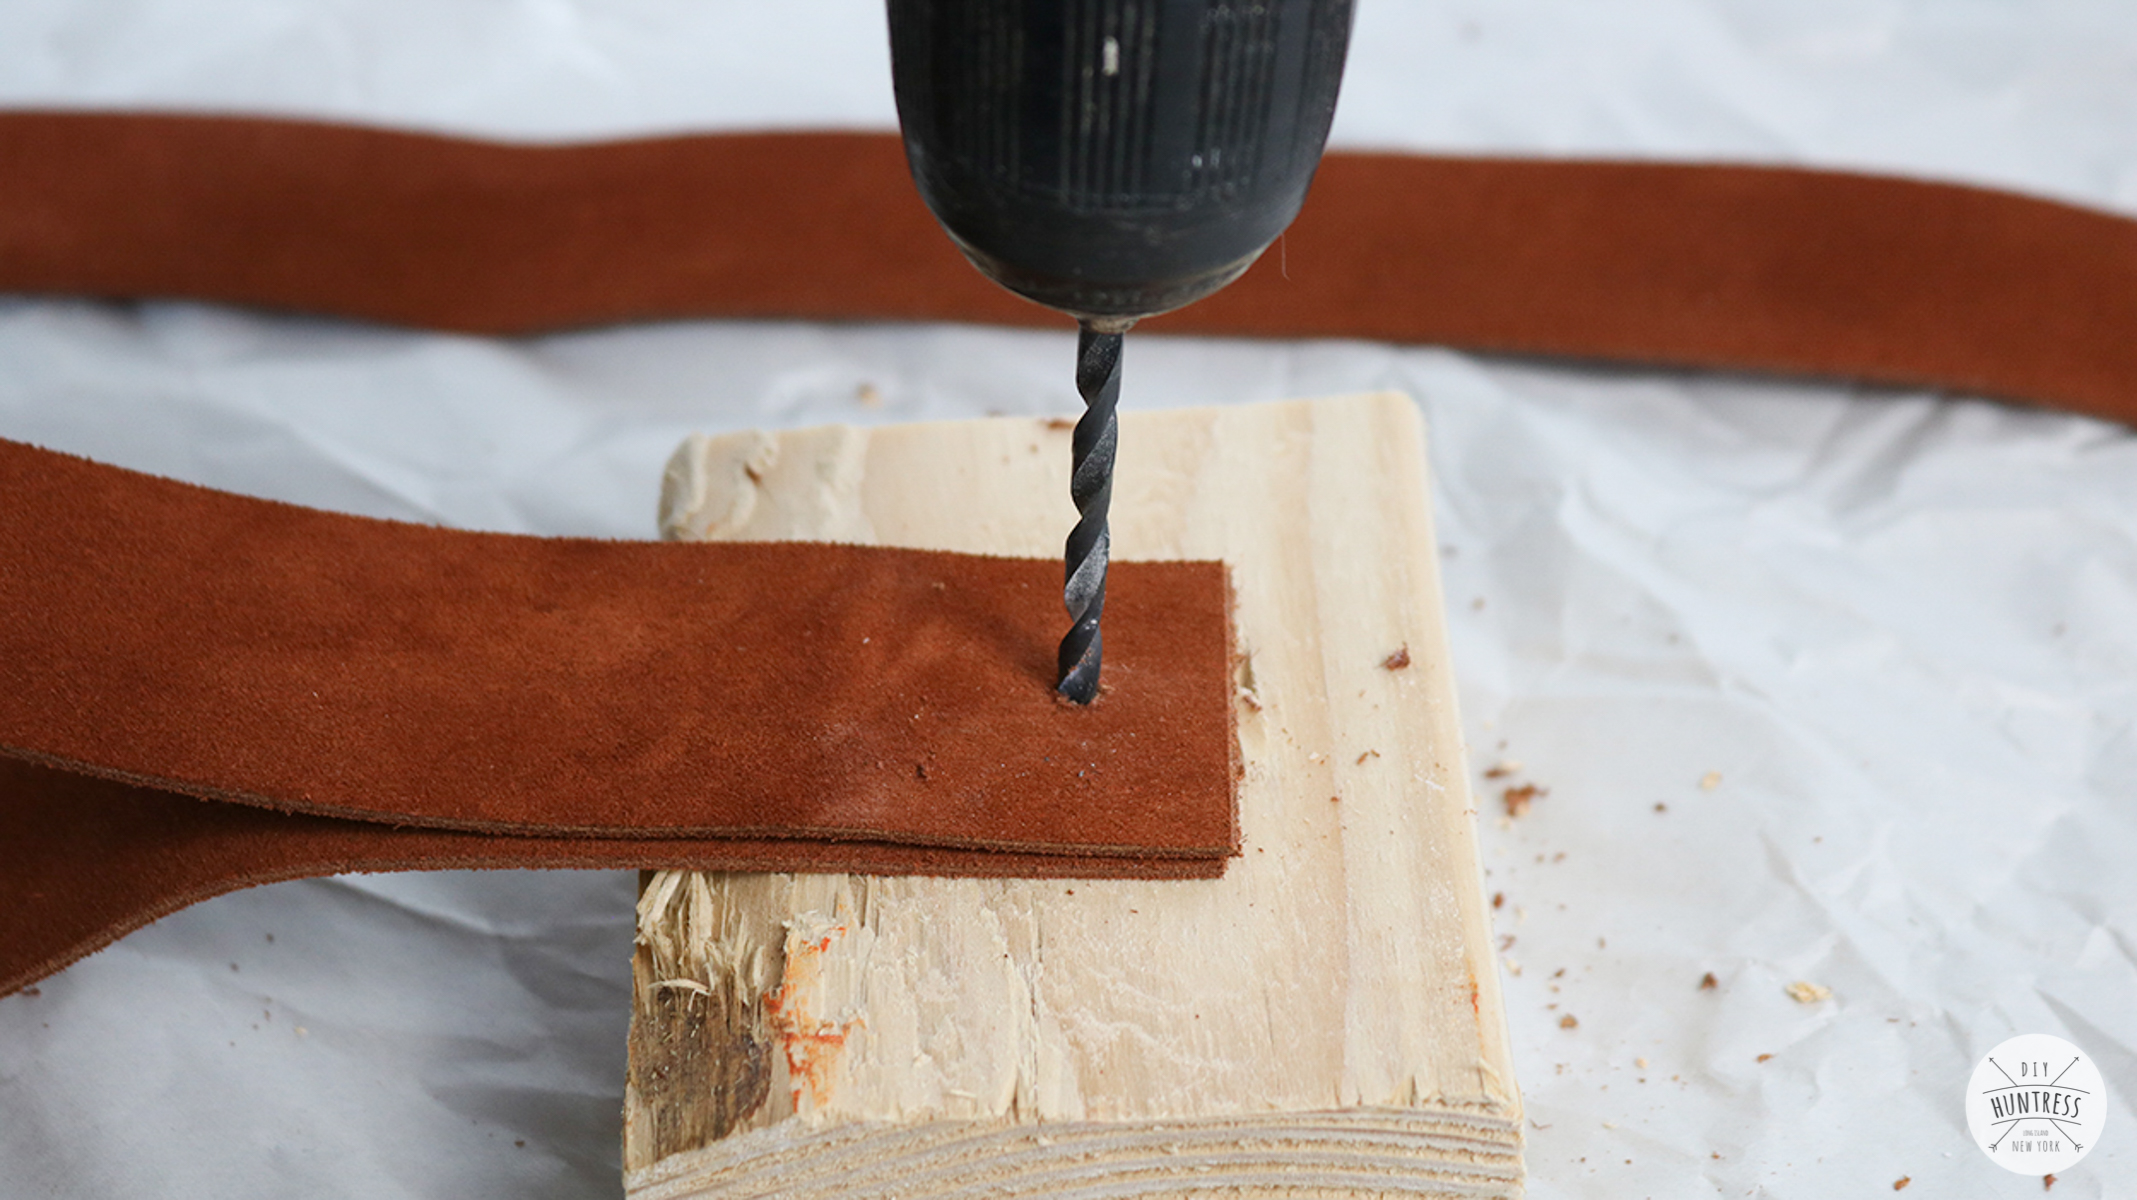 Drilling leather